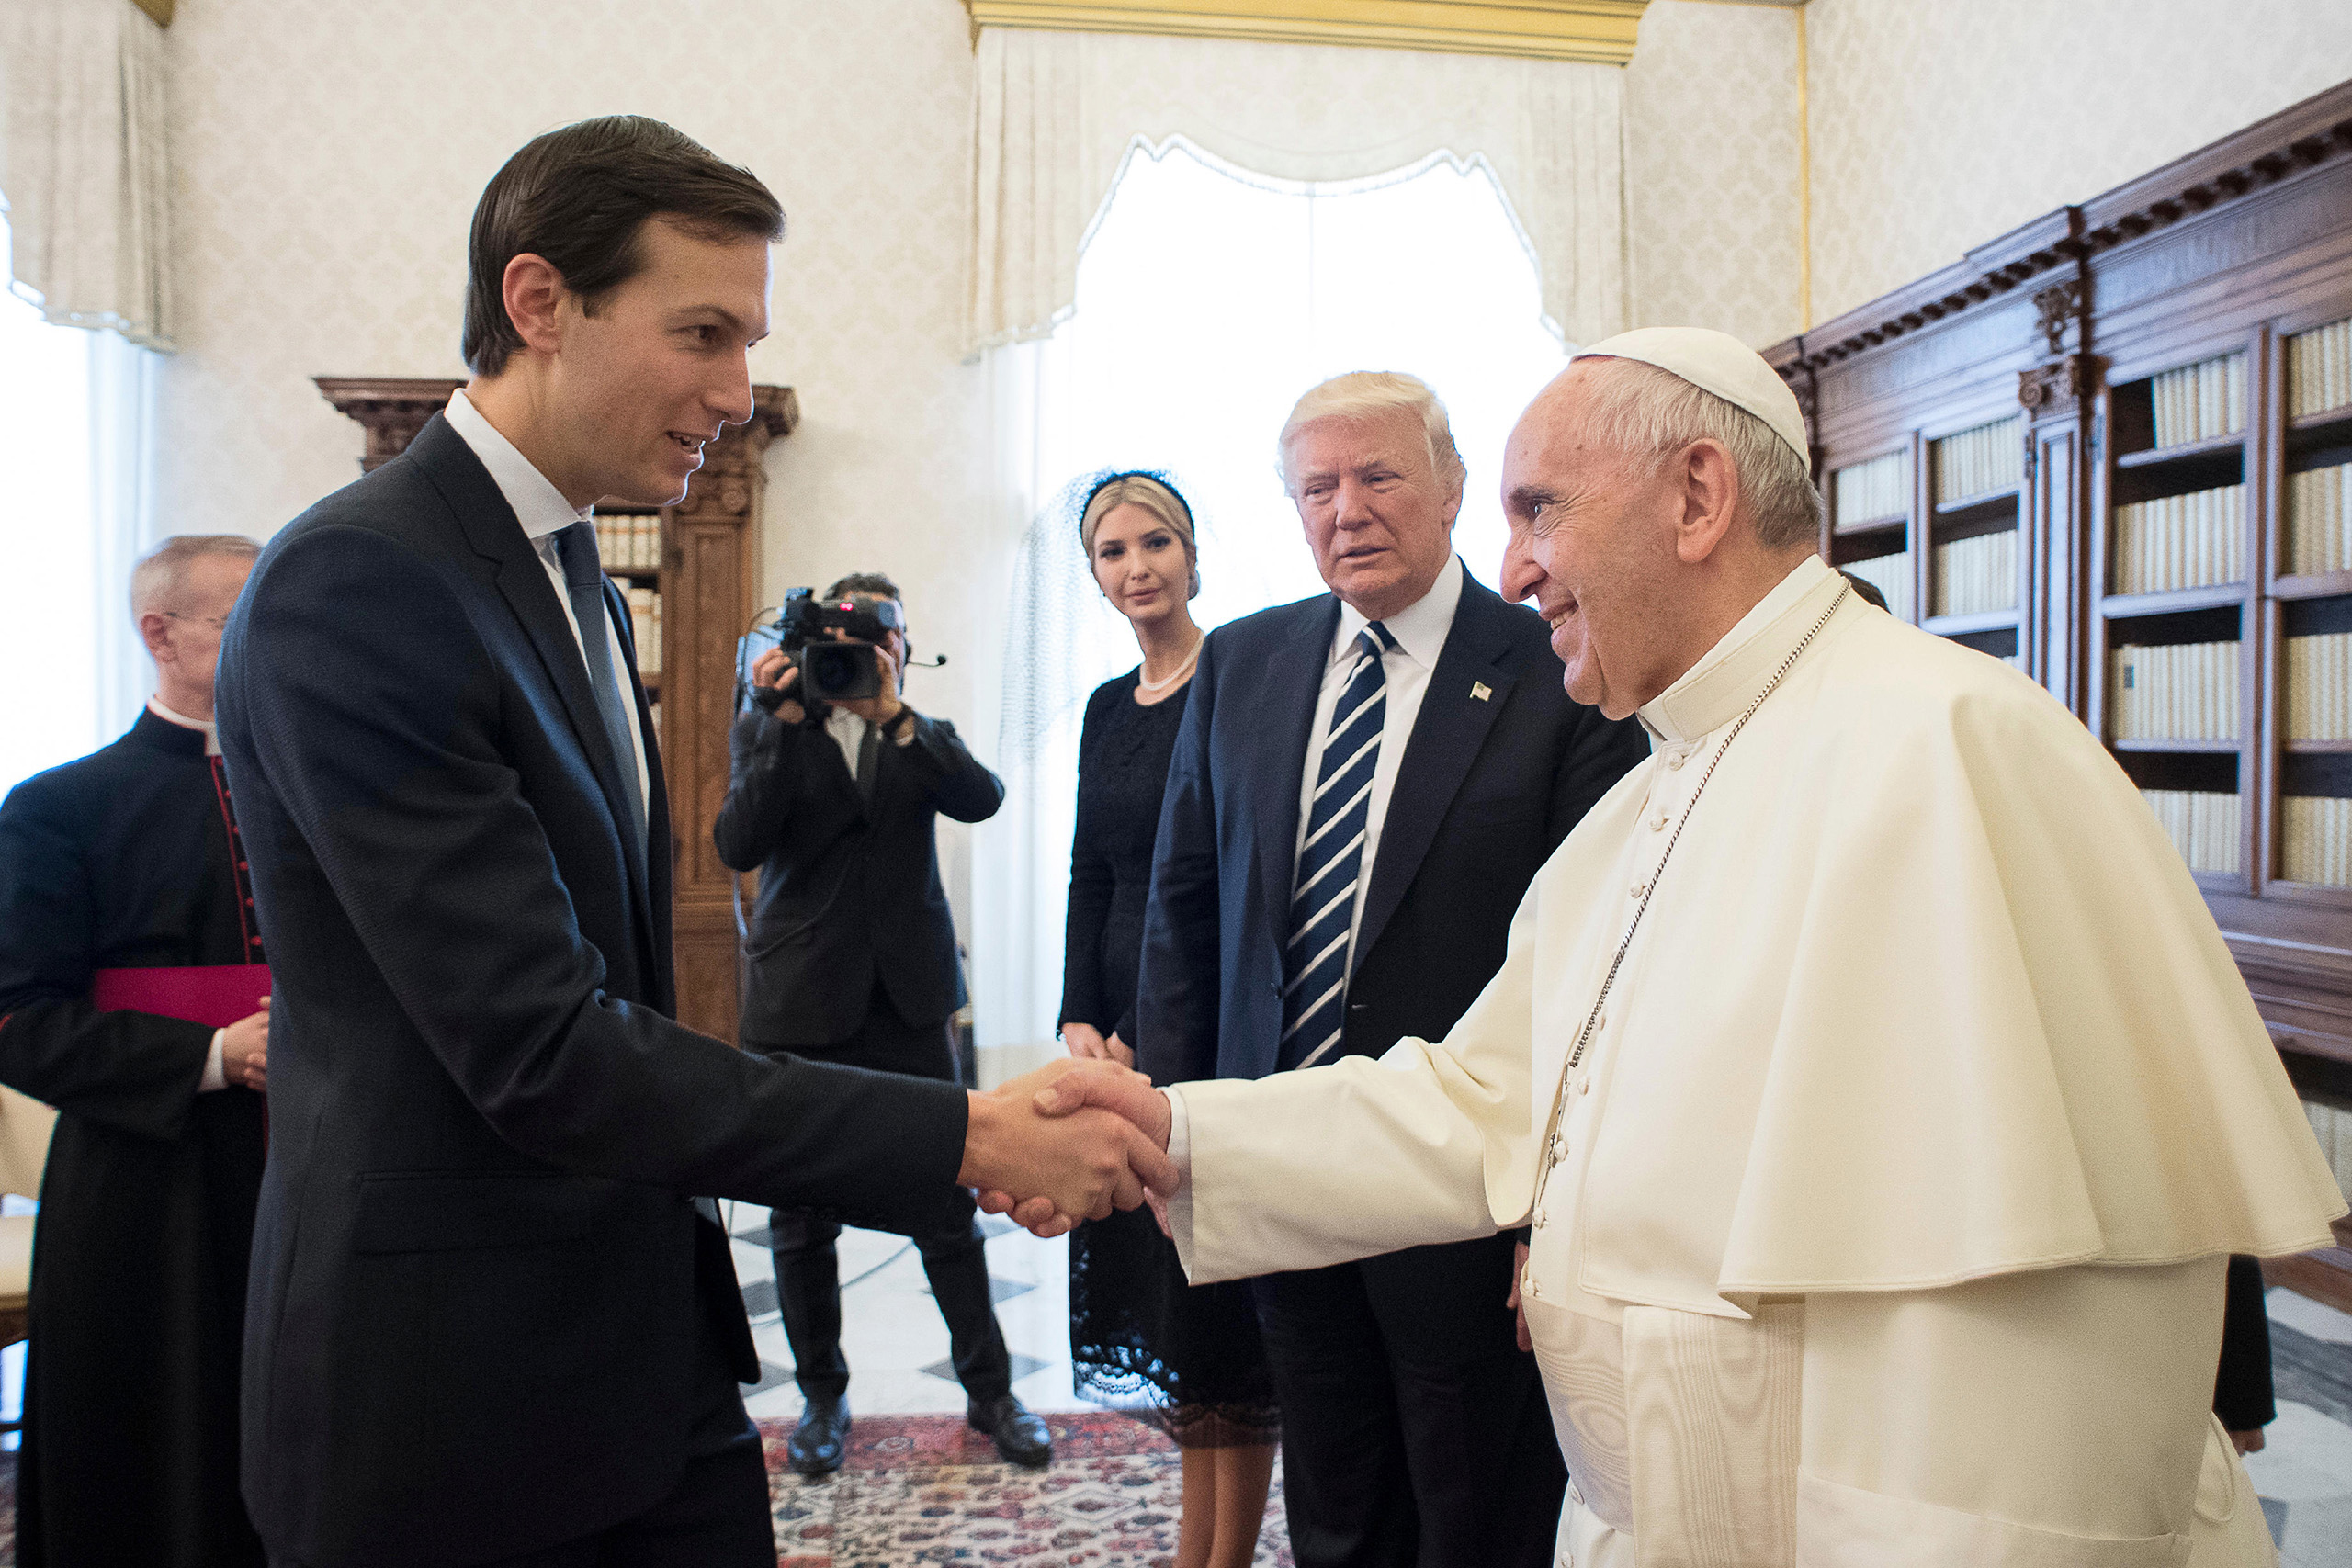 Pope Francis greets White House senior advisor Jared Kushner during a meeting with US President Donald Trump, his wife First Lady Melania Trump and his daughter Ivanka at the Vatican on May 24, 2017.